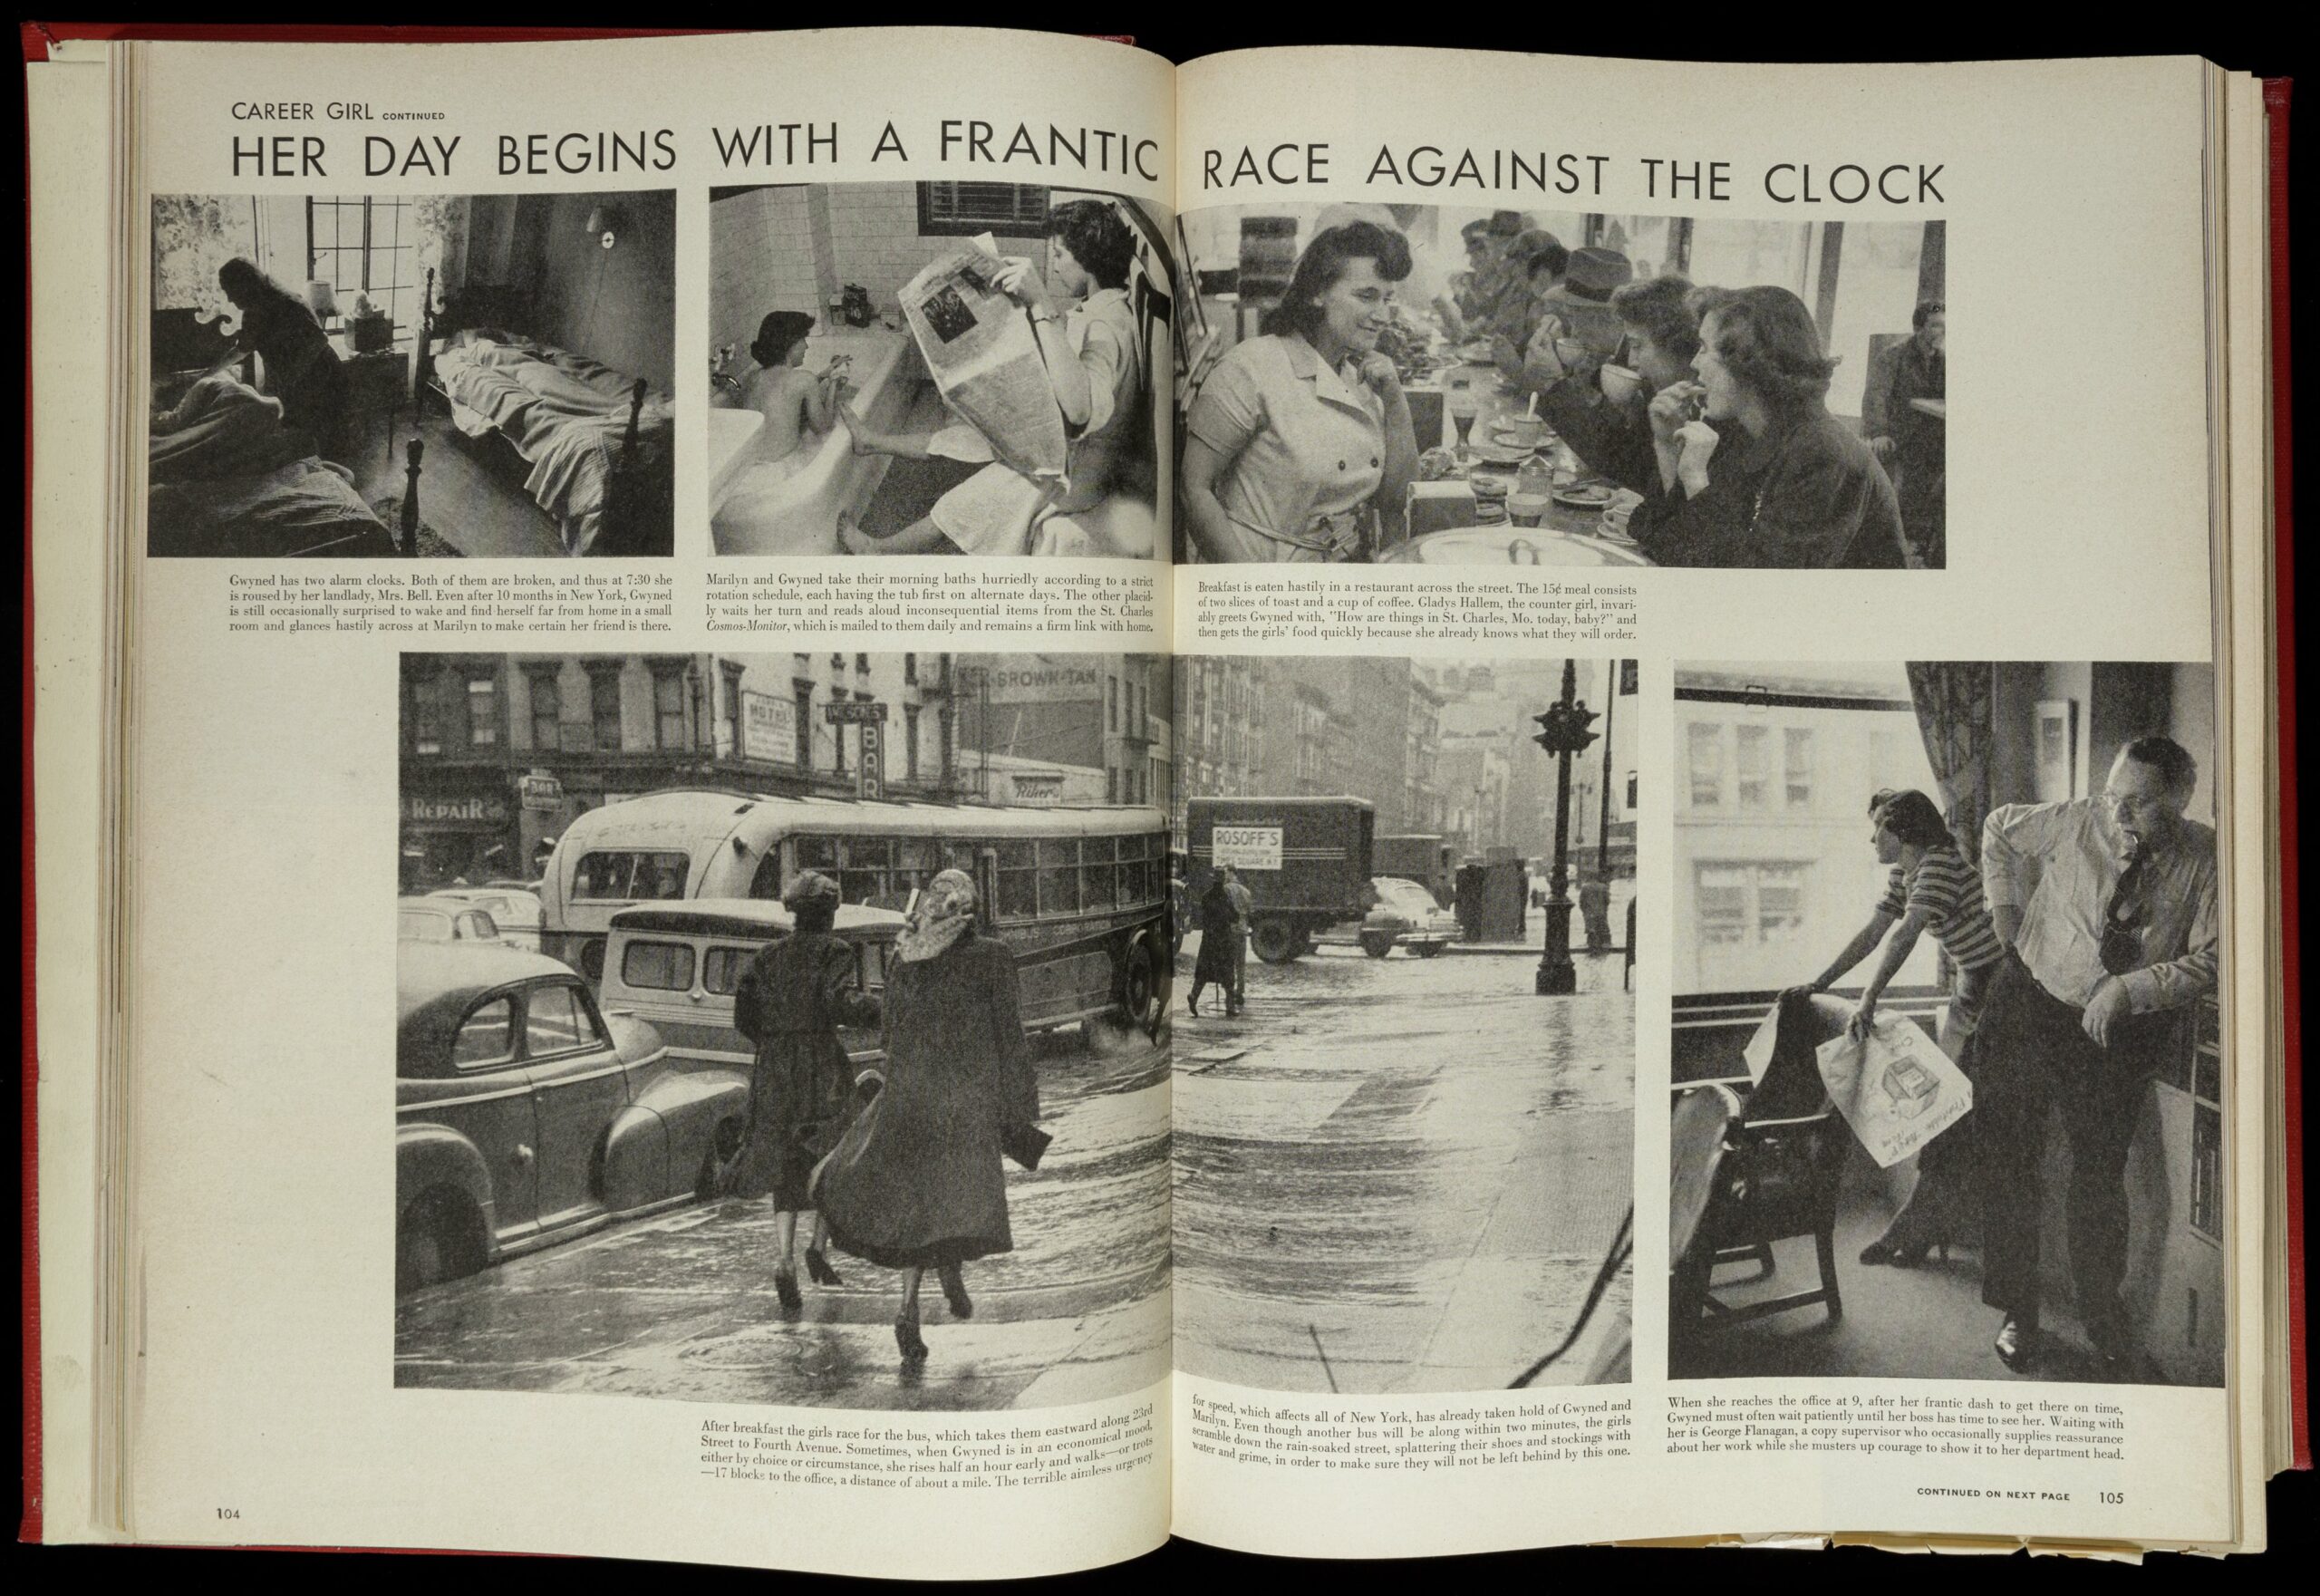 Two-page spread entitled "Her Day Begins with a Frantic Race Against the Clock." Photos of Filling at a lunch counter, in a office with a man, walking on the sidewalk, in her bedroom, and reading in the bathroom (clockwise from top right).